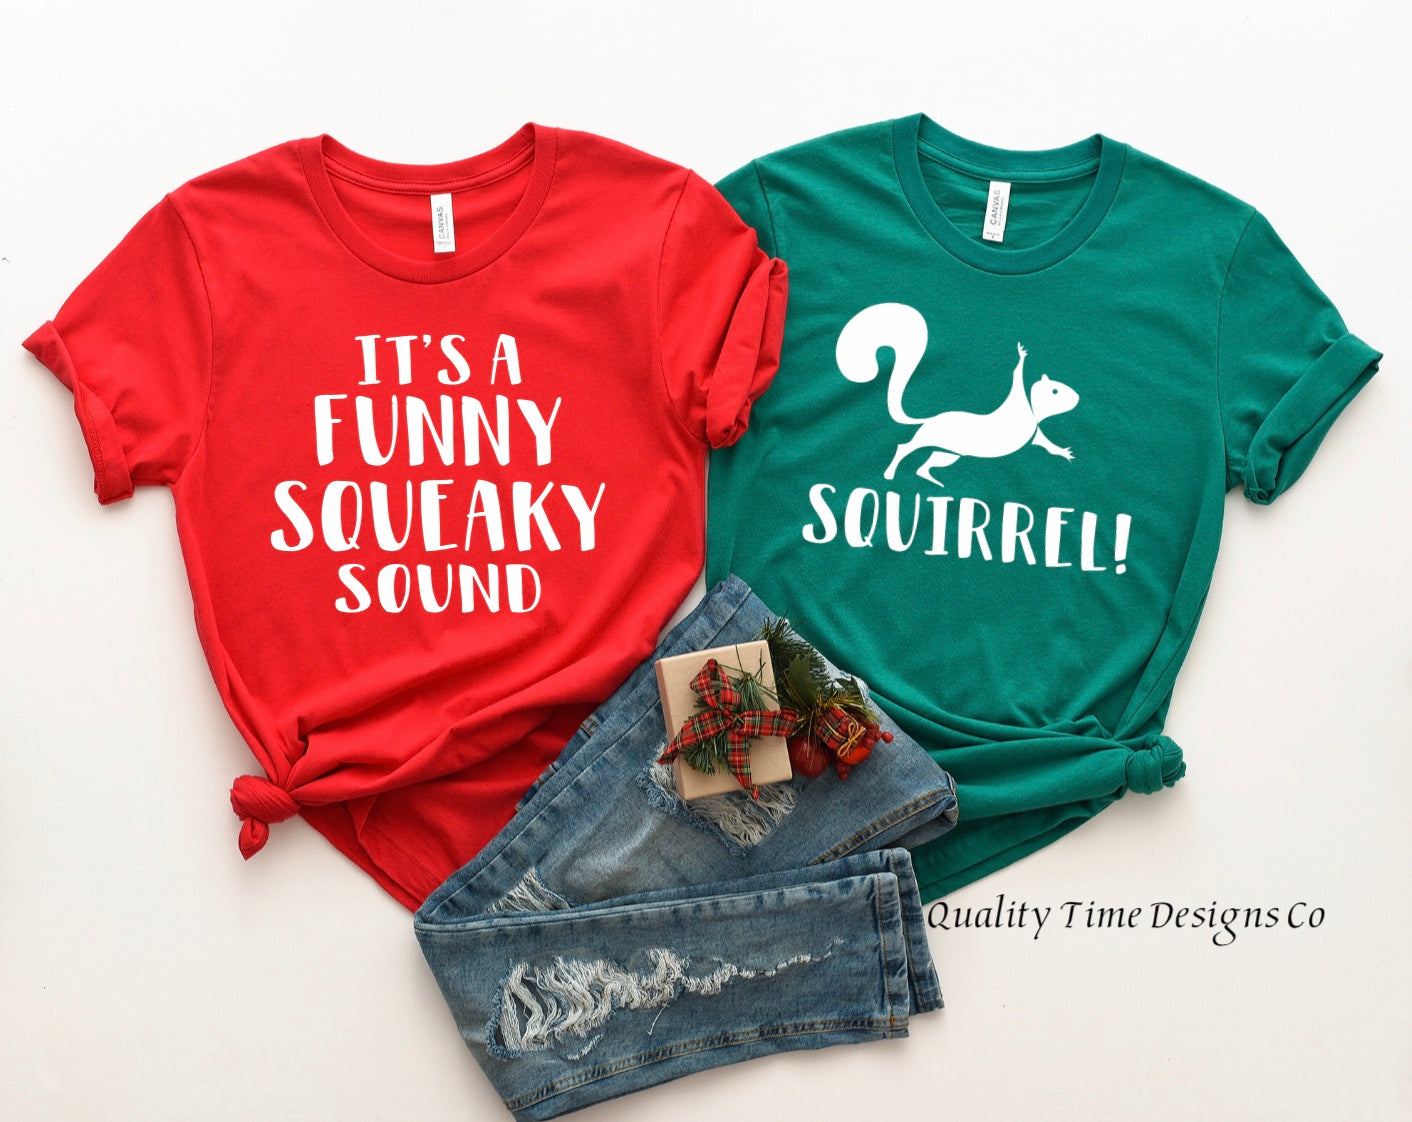 It’s a funny squeaky sound/squirrel t-shirts 